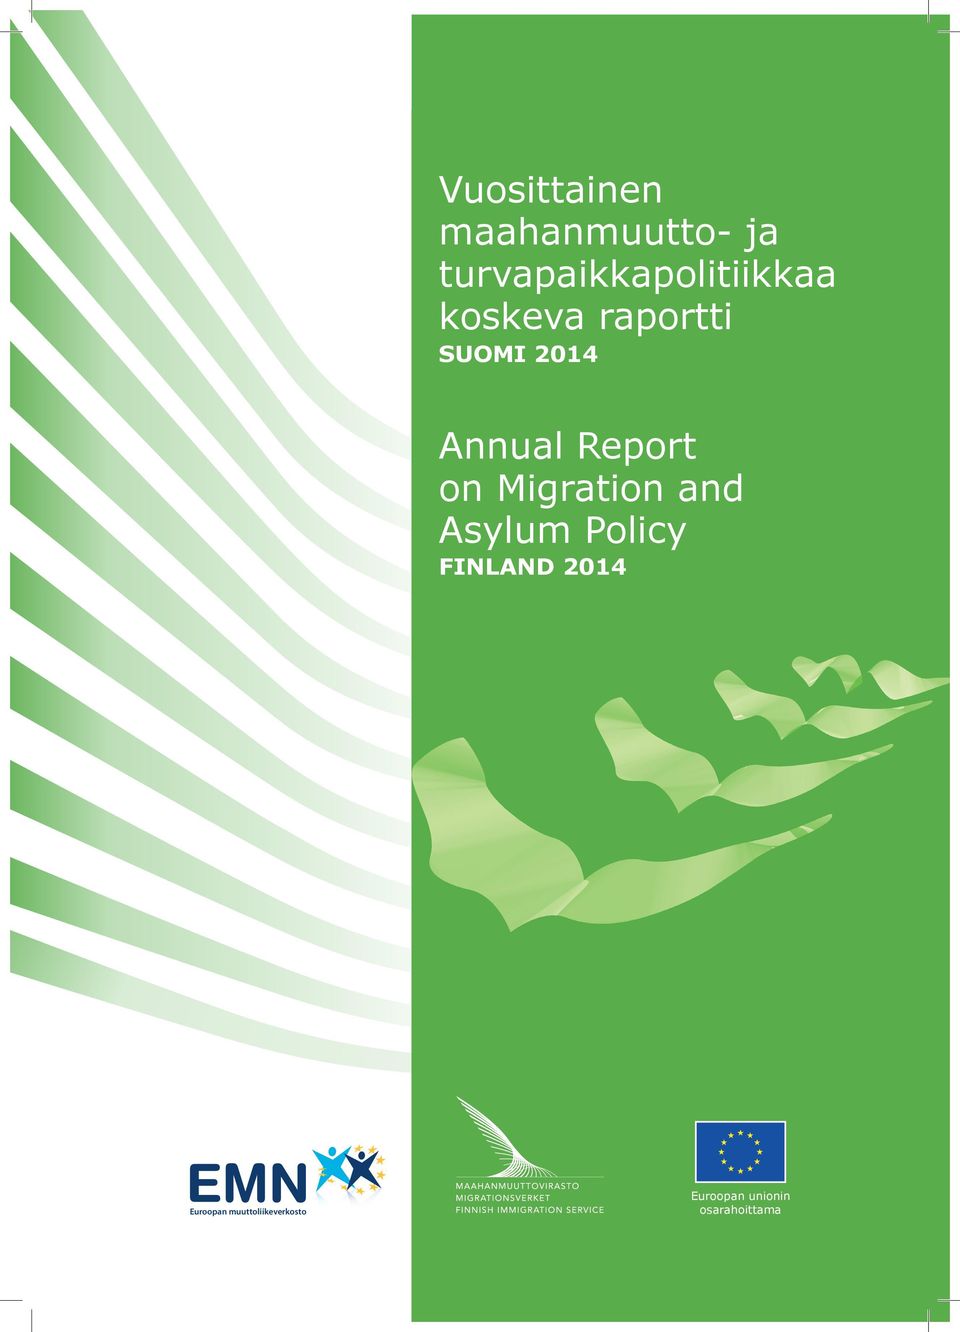 2014 Annual Report on Migration and Asylum Policy